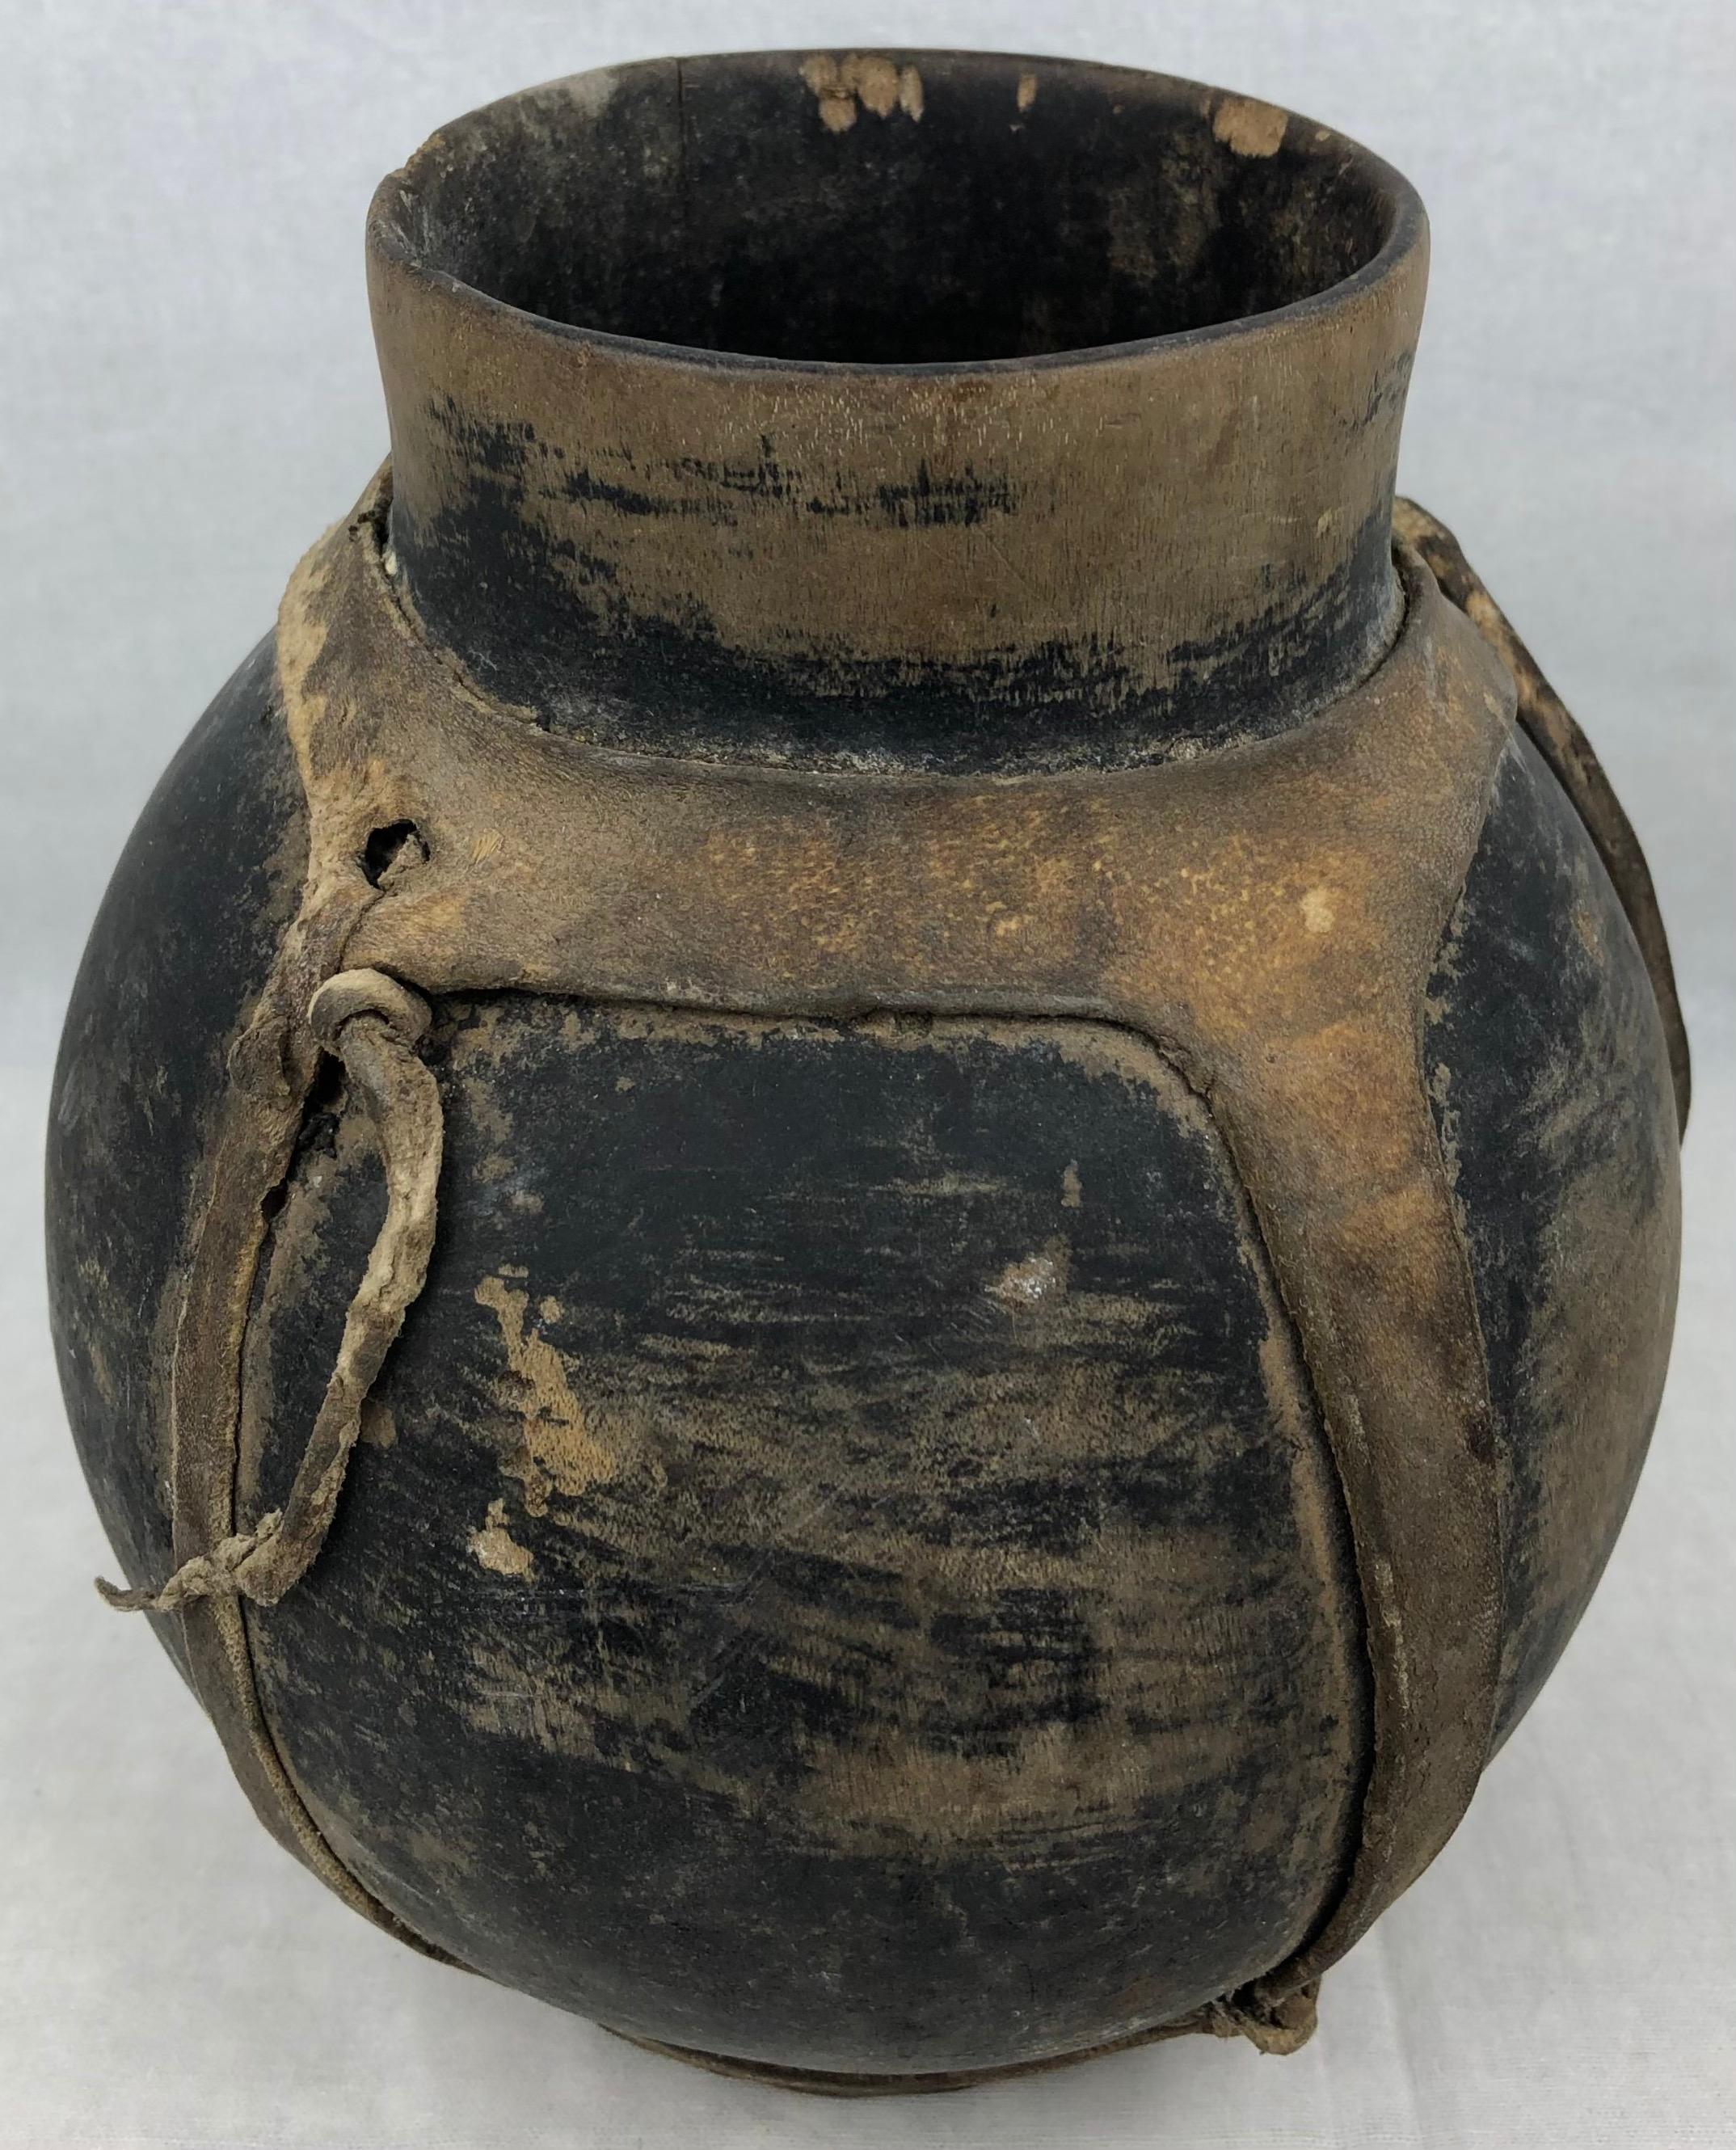 Central African Tribal Pot or Wooden Vase Neutral Brown In Good Condition For Sale In Miami, FL